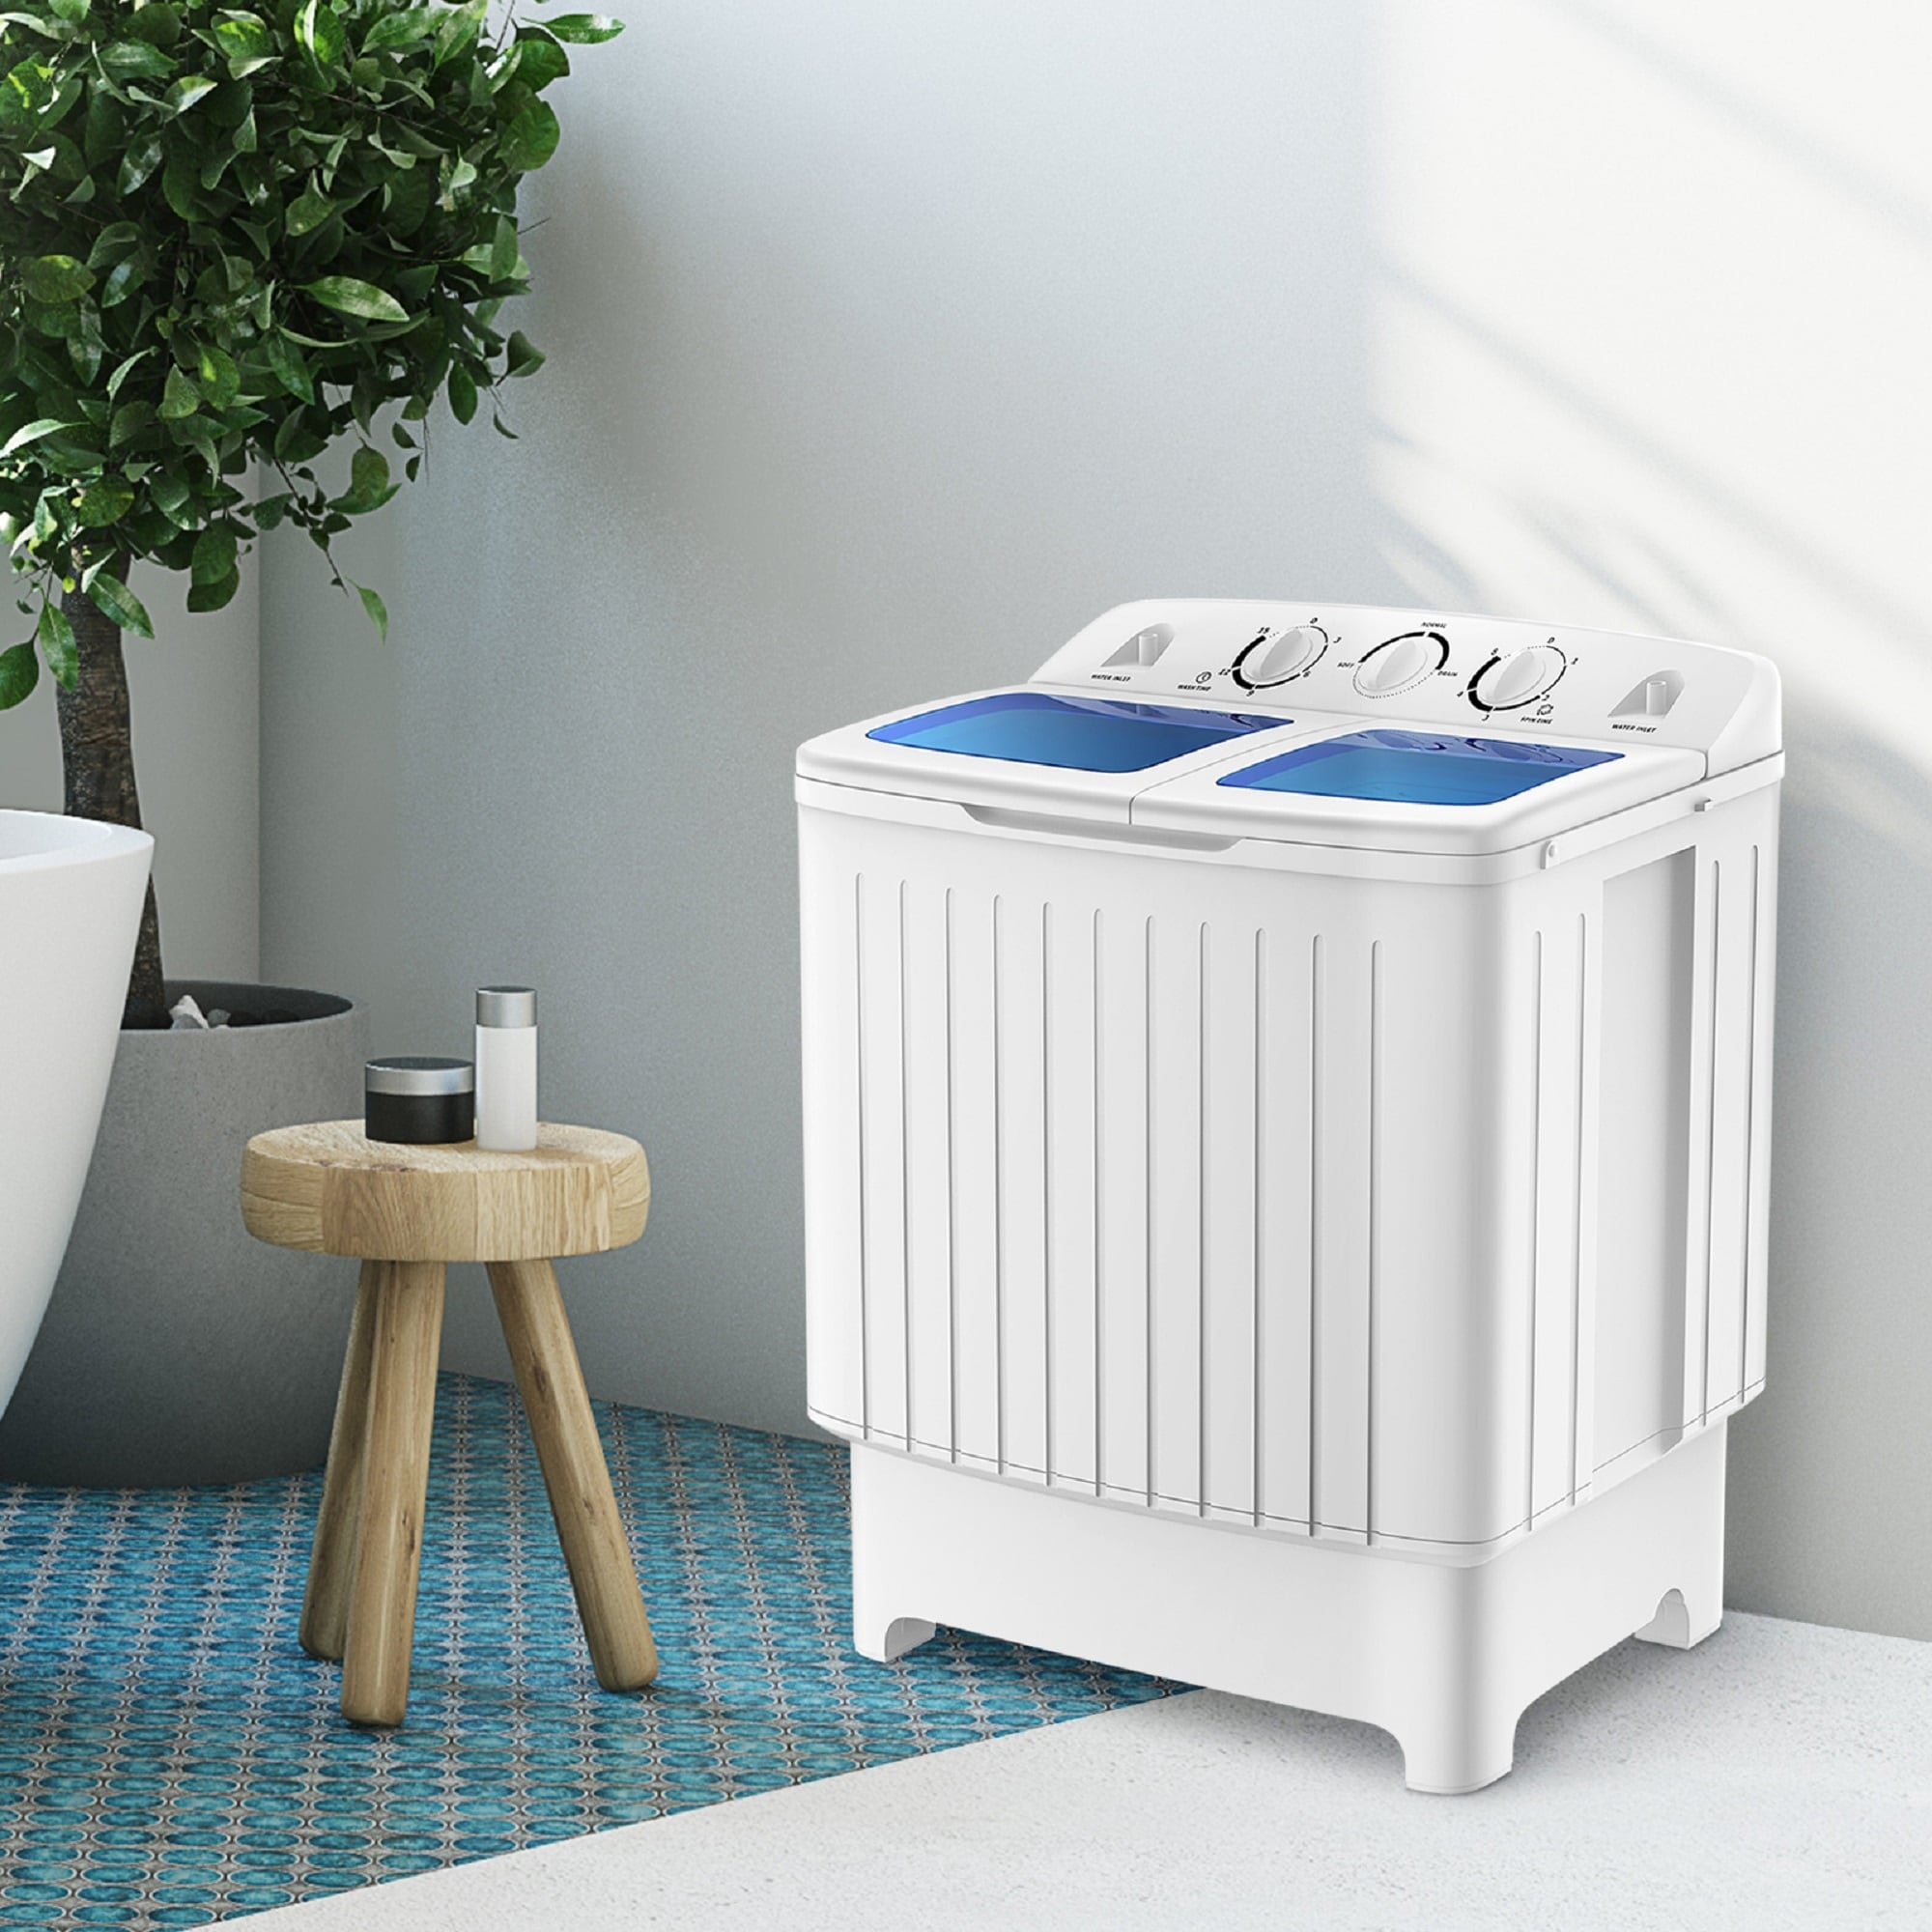  COSTWAY Portable Washing Machine, Twin Tub 20Lbs Capacity,  Washer(12Lbs) and Spinner(8Lbs), Compact Laundry Machines Durable Design  Energy Saving, Rotary Controller Drain Hose, Grey+White : Appliances